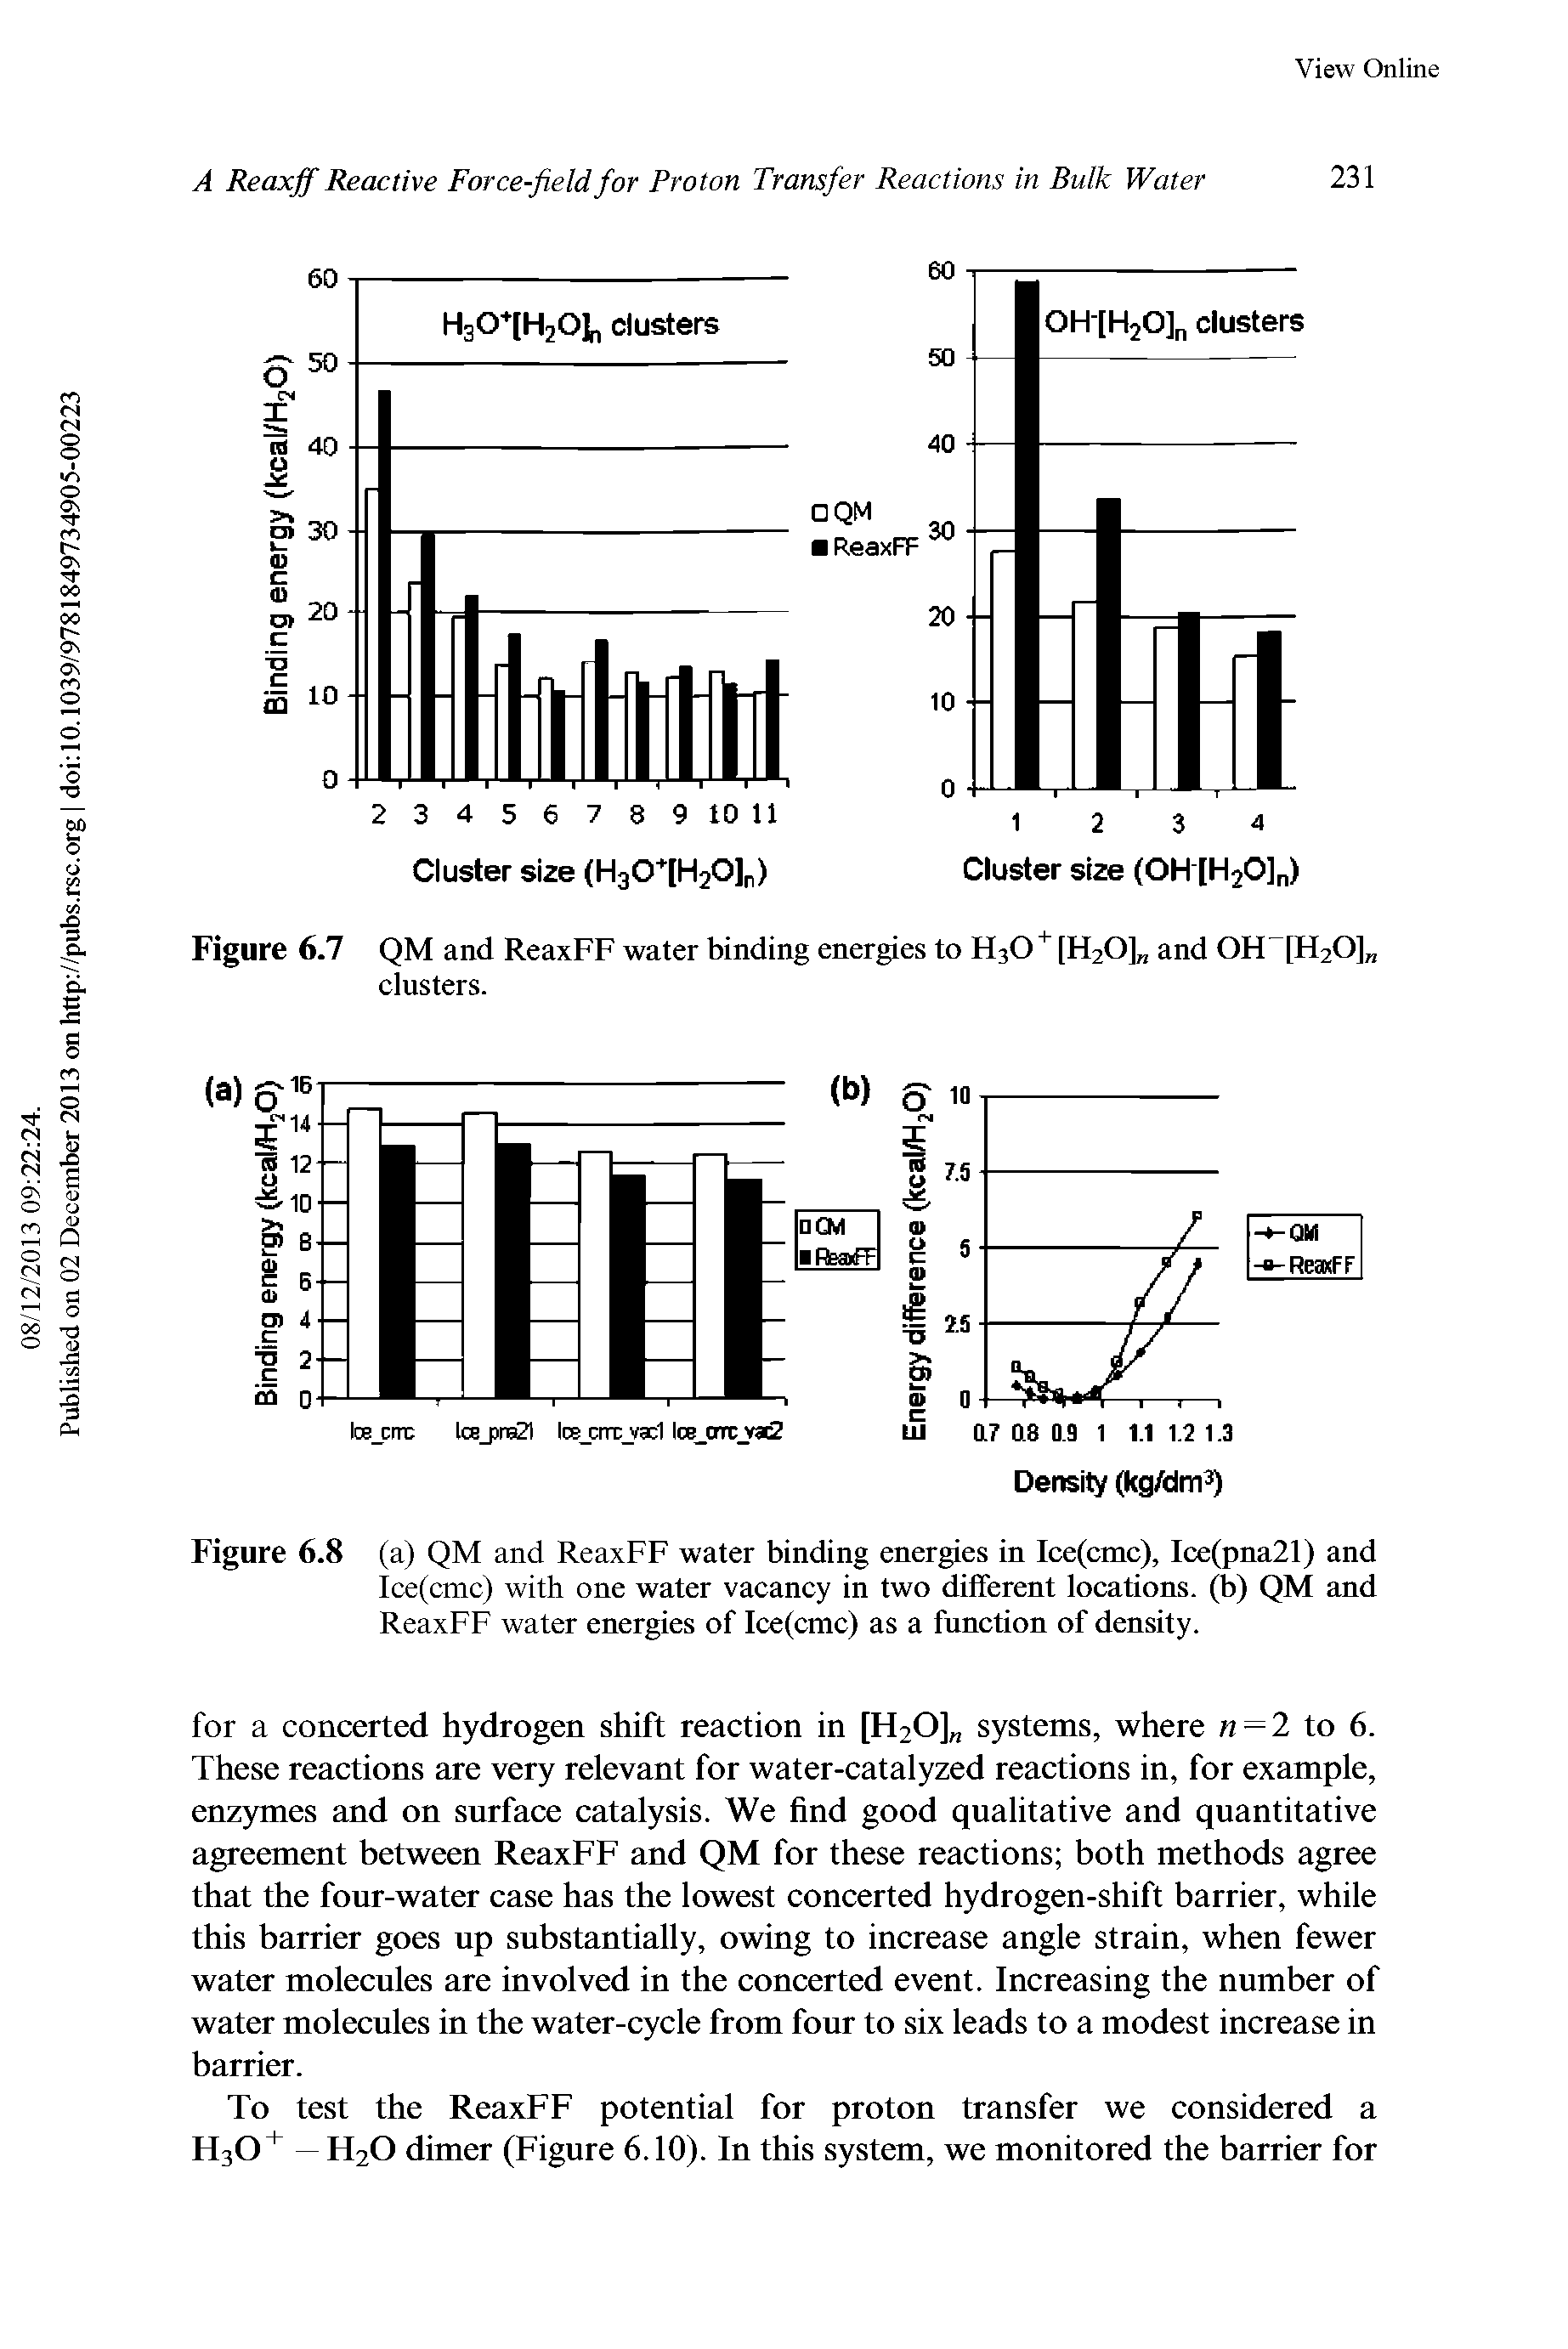 Figure 6.7 QM and ReaxFF water binding energies to HgO [H20] and OH [H20] clusters.